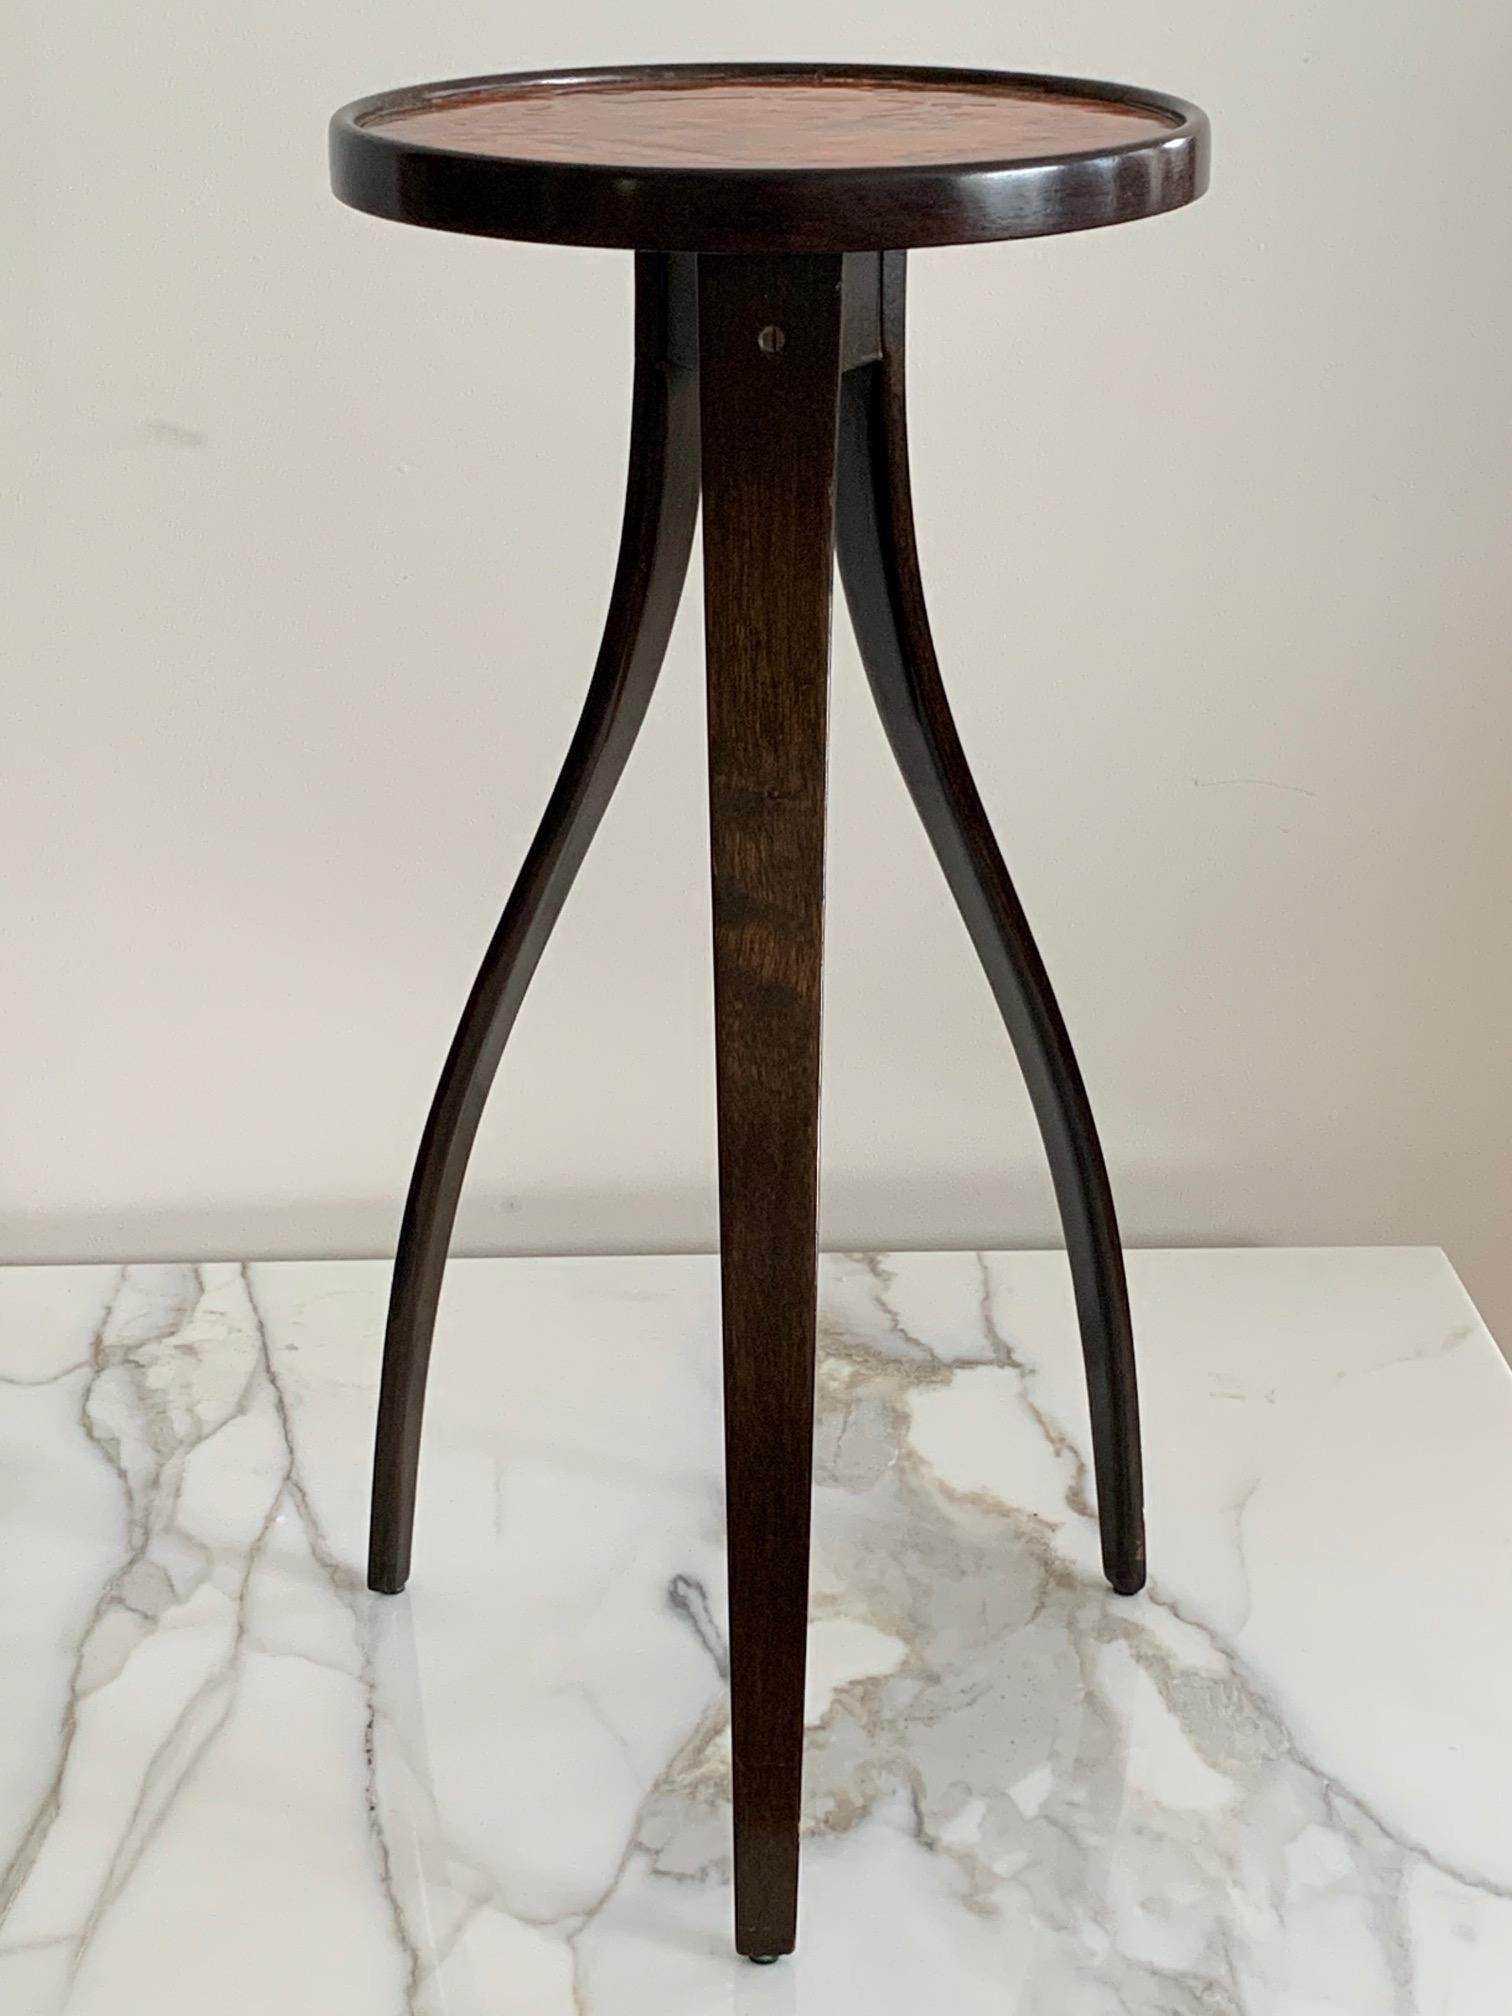 A rare and unusual Harvey Probber side table/gueridon with elegant bentwood legs and enamel top.